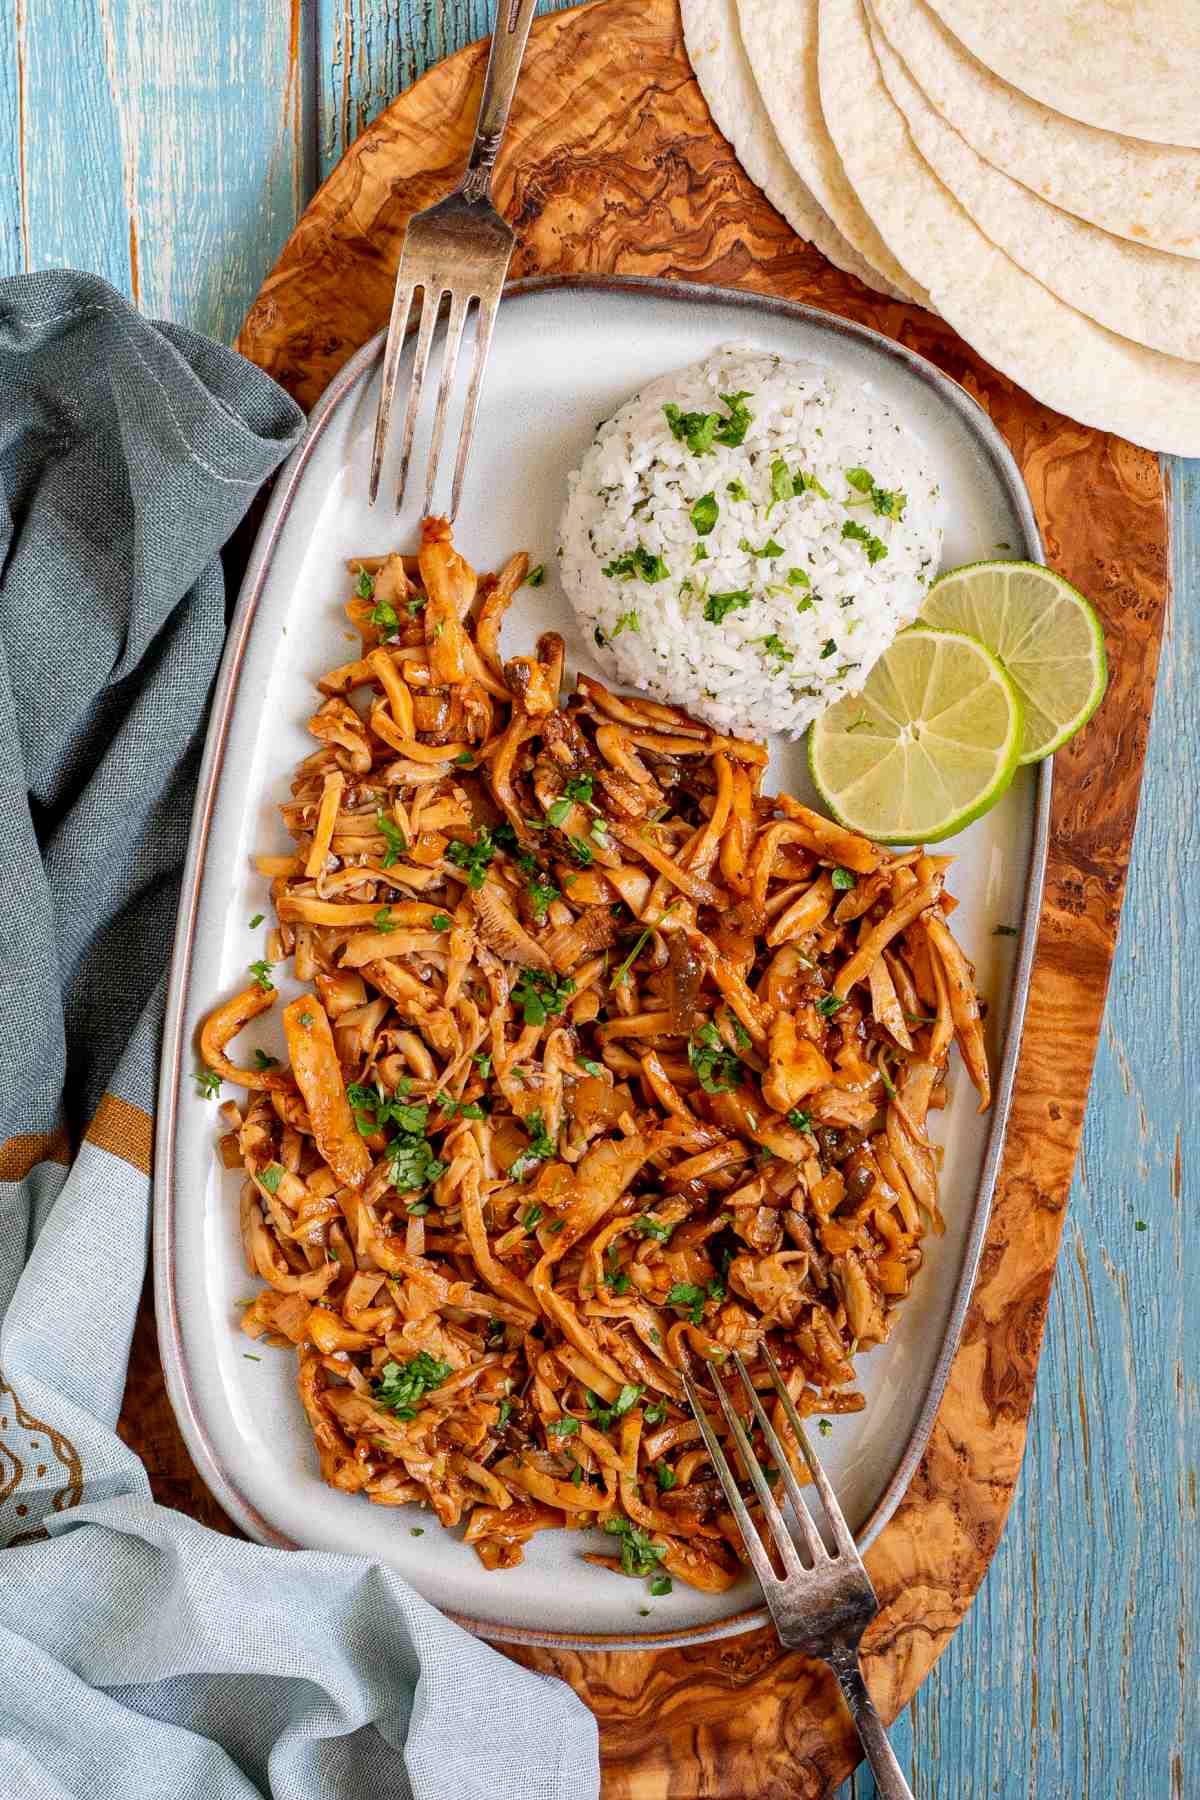 Thin juicy golden brown oyster mushrooms shred sprinkled with chopped green herbs on a light blue tray served with a scoop of rice.